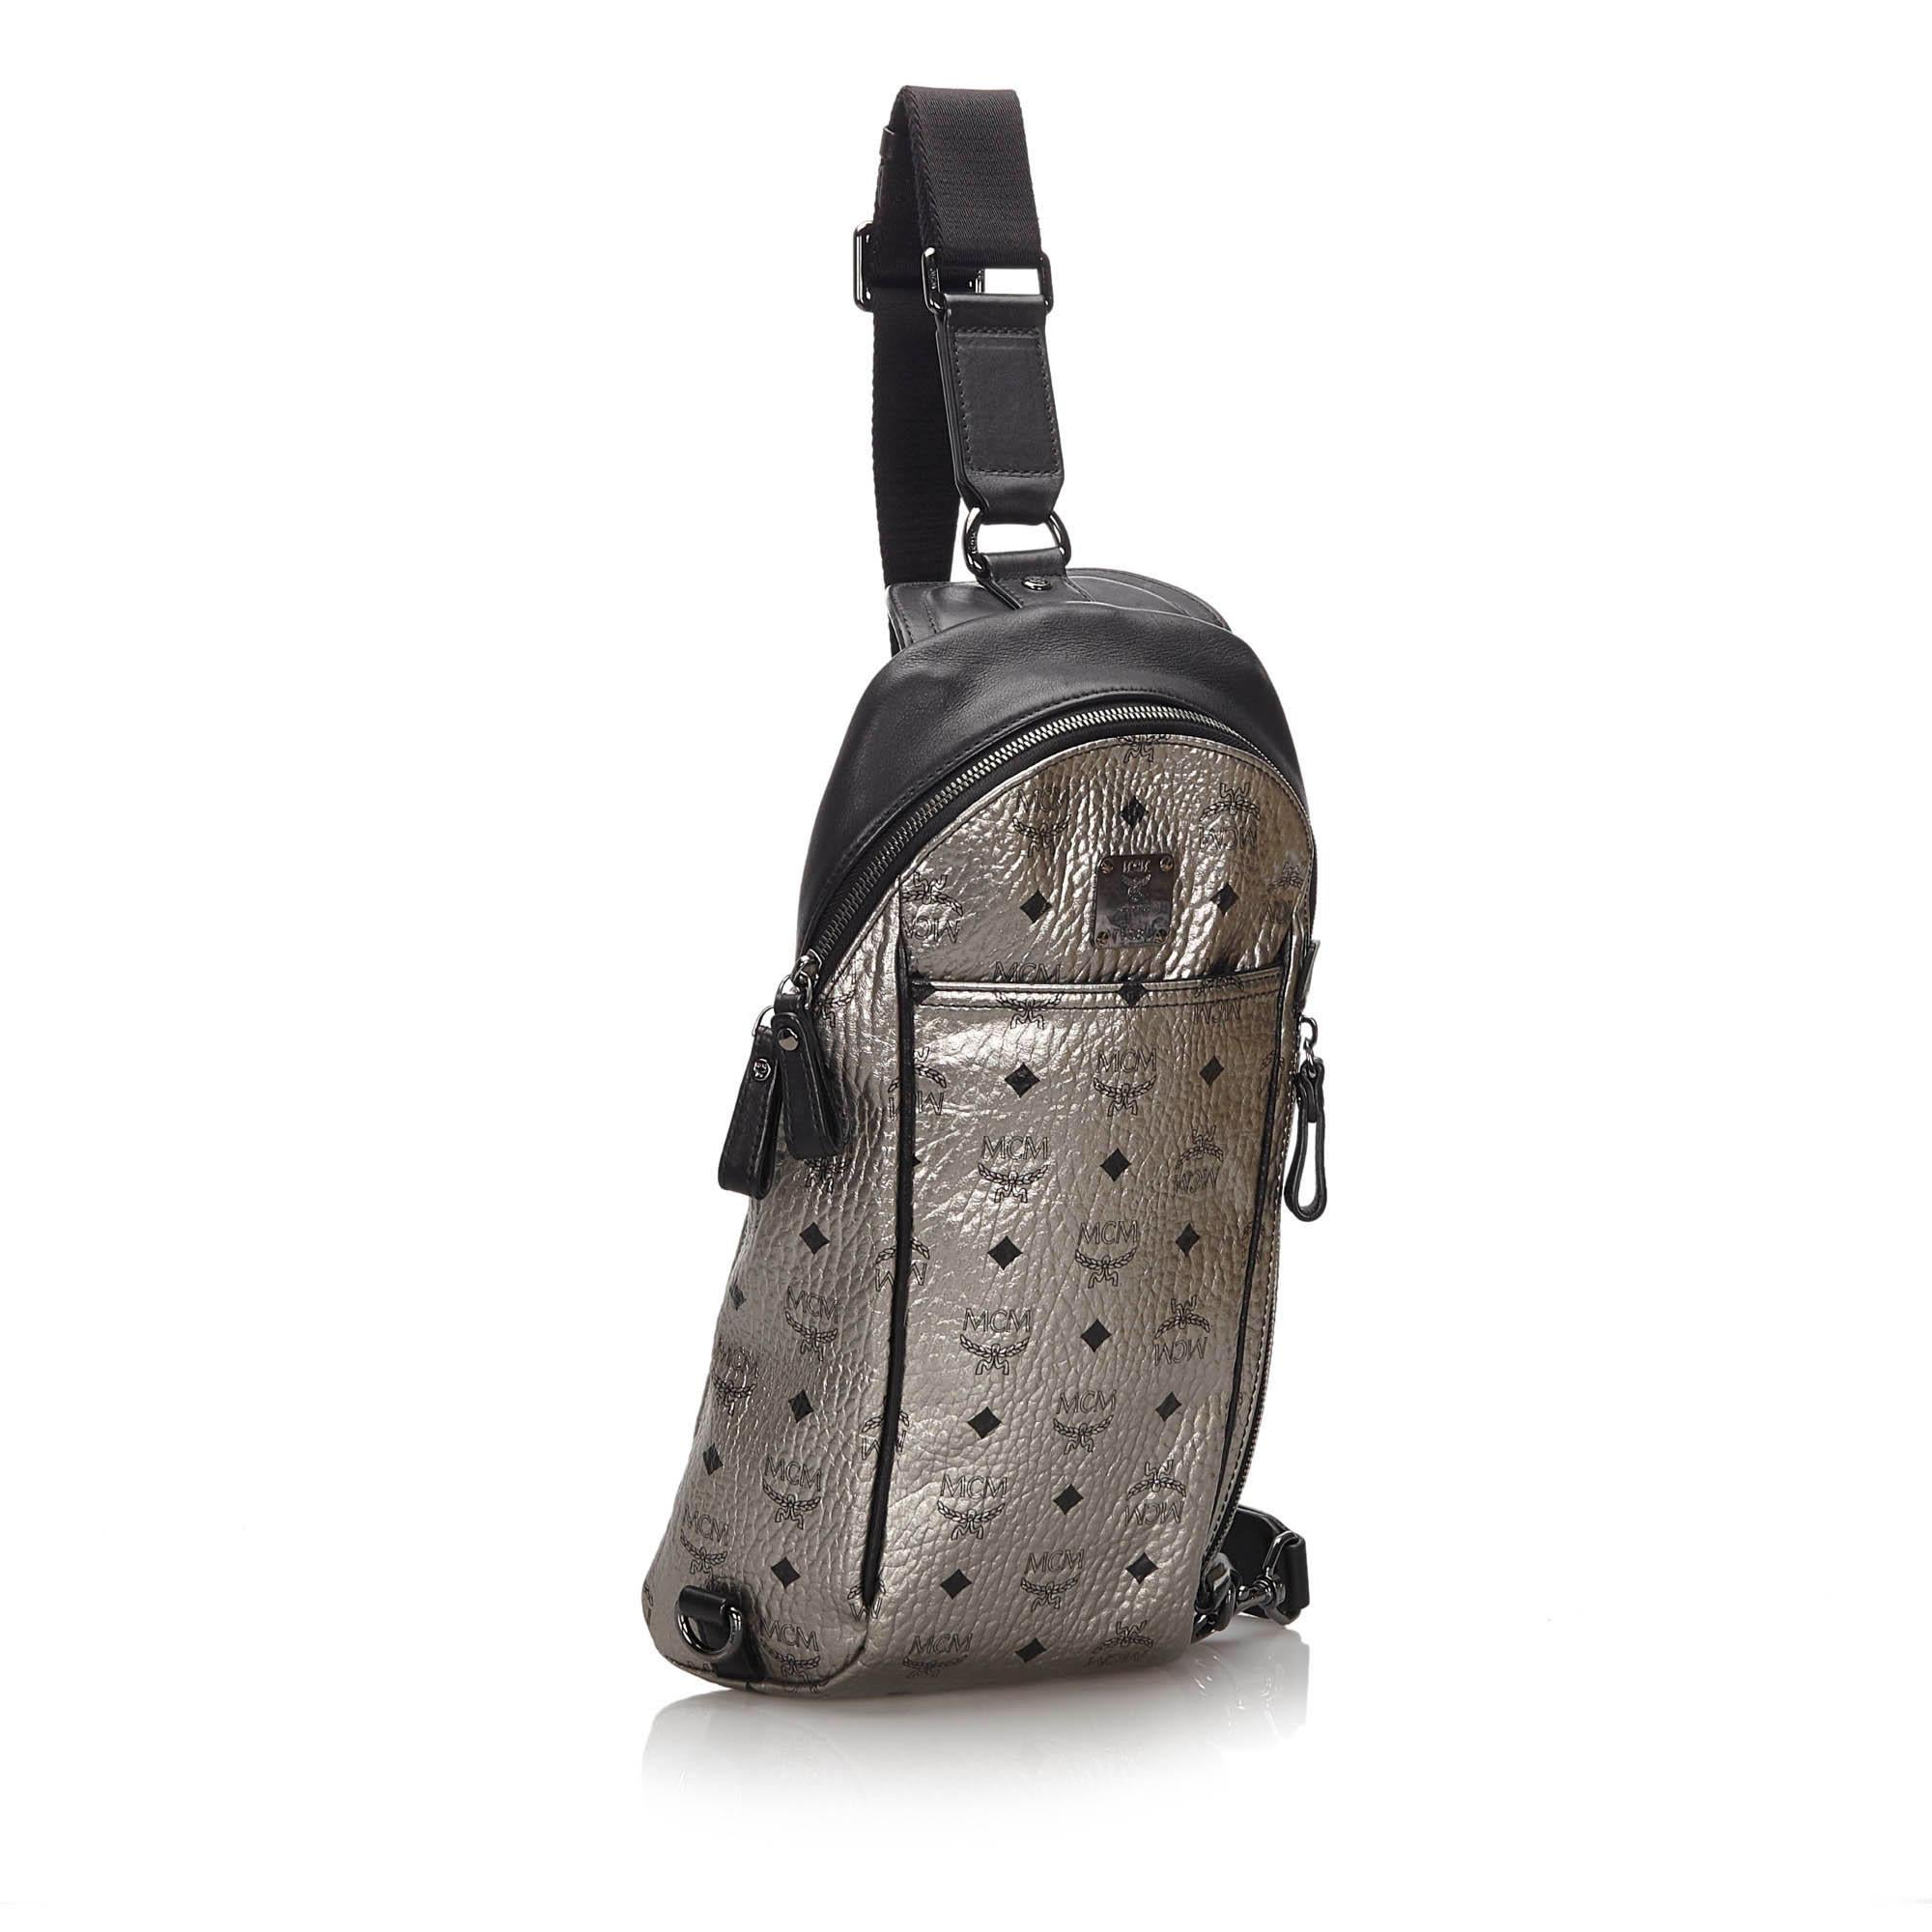 The Stark Sling Backpack features a leather body, a front exterior zip pocket, an adjustable flat strap, and a top zip closure. It carries as B+ condition rating.

Inclusions: 
Dust Bag
Dimensions:
Length: 36.00 cm
Width: 20.00 cm
Depth: 8.00